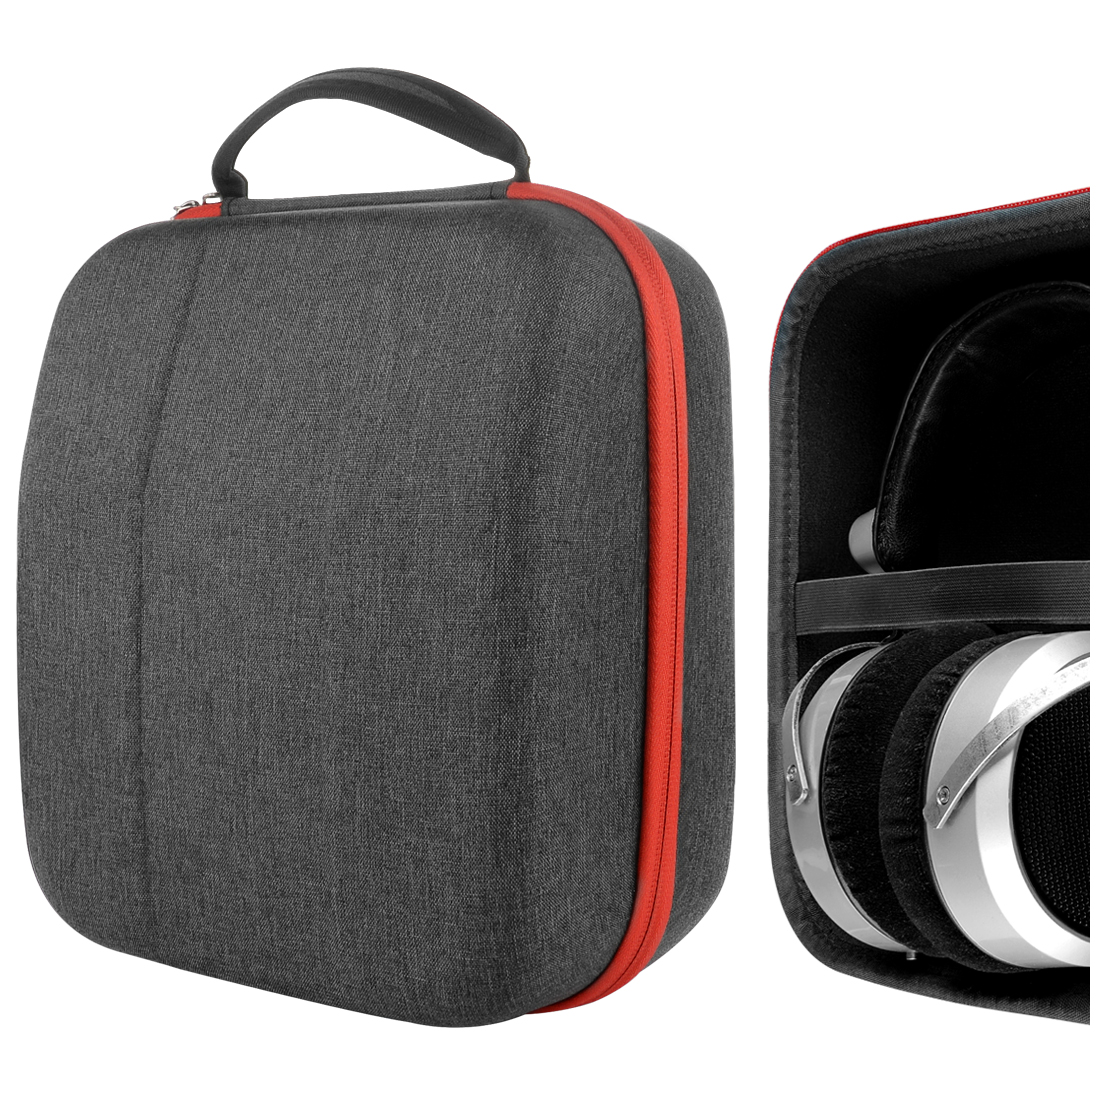 Geekria Hard Shell Headphones Case with Cable Storage